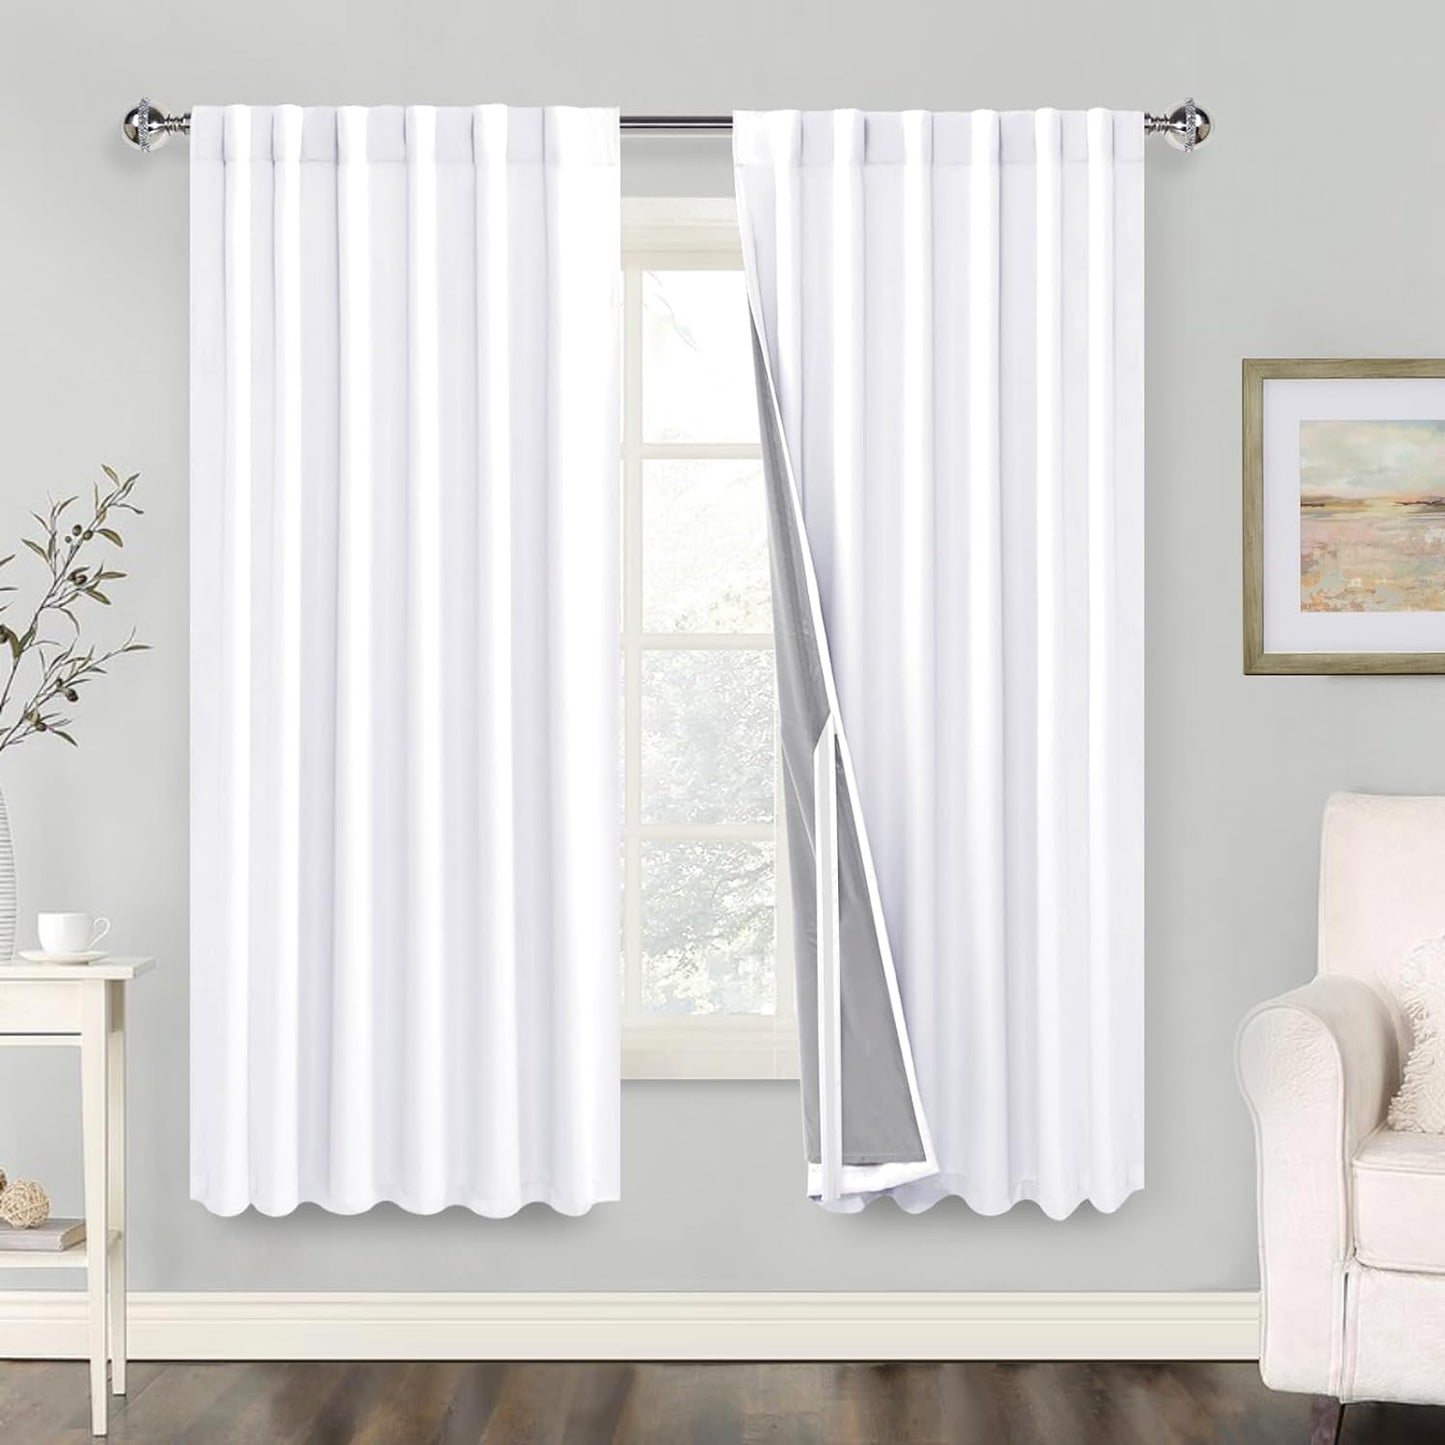 100% Blackout Curtains 2 Panels with Tiebacks- Heat and Full Light Blocking Window Treatment with Black Liner for Bedroom/Nursery, Rod Pocket & Back Tab，White, W52 X L84 Inches Long, Set of 2  XWZO White W52" X L63"|2 Panels 